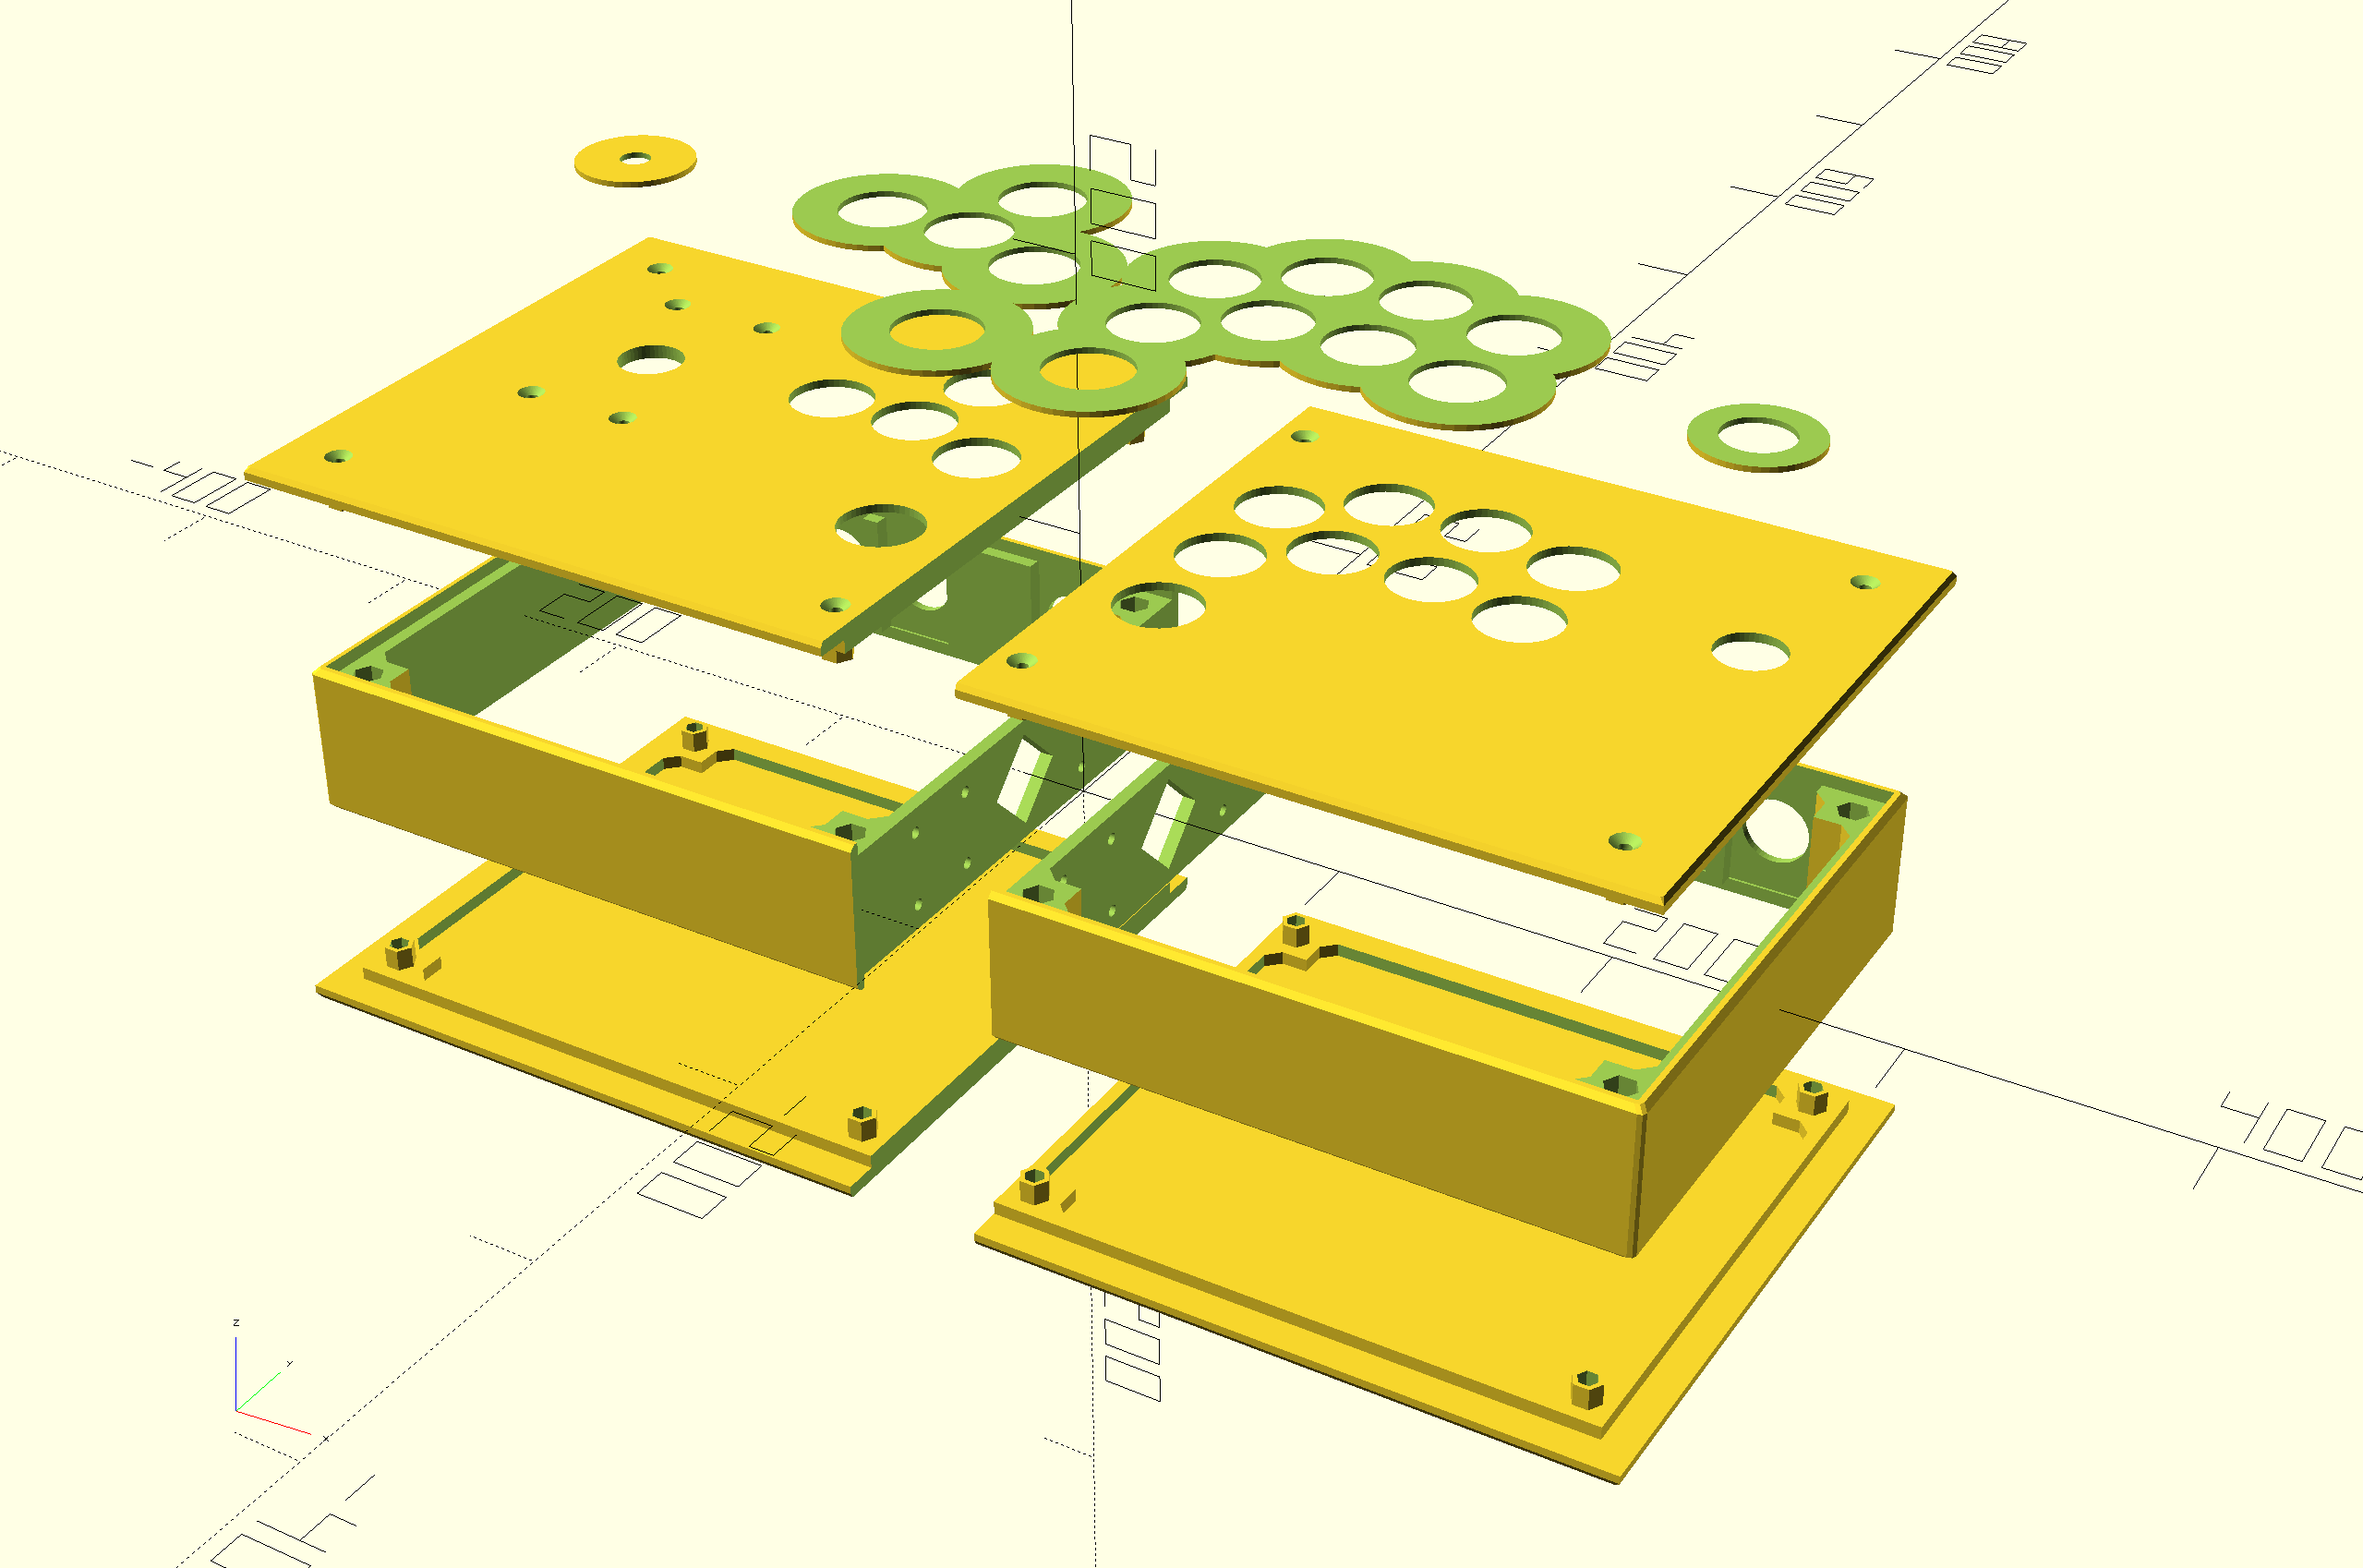 An example of stick components displayed in OpenSCAD